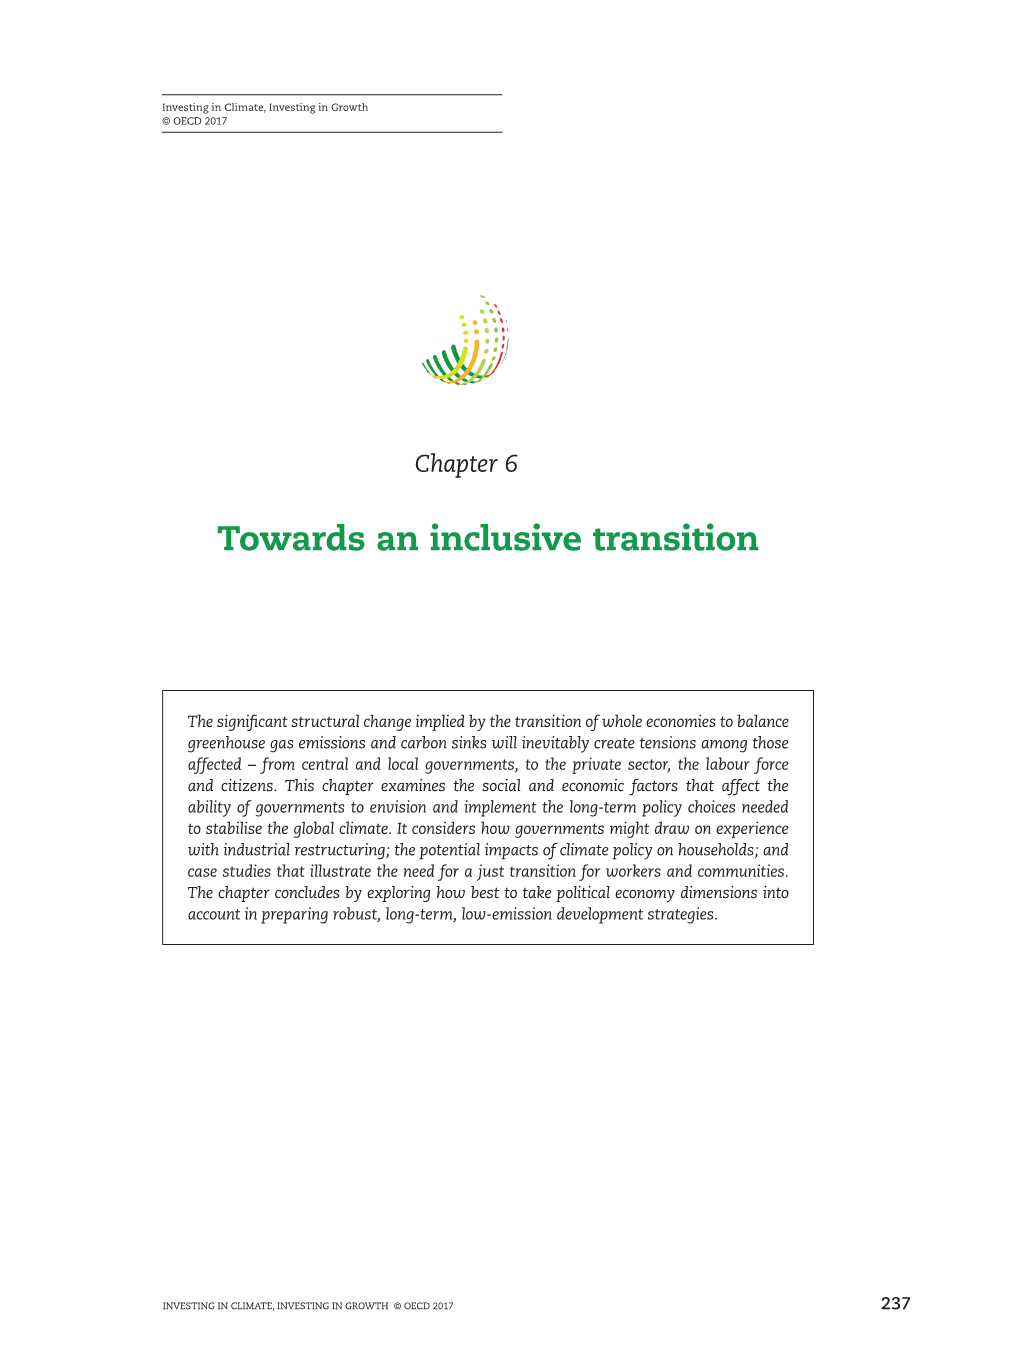 Towards an Inclusive Transition